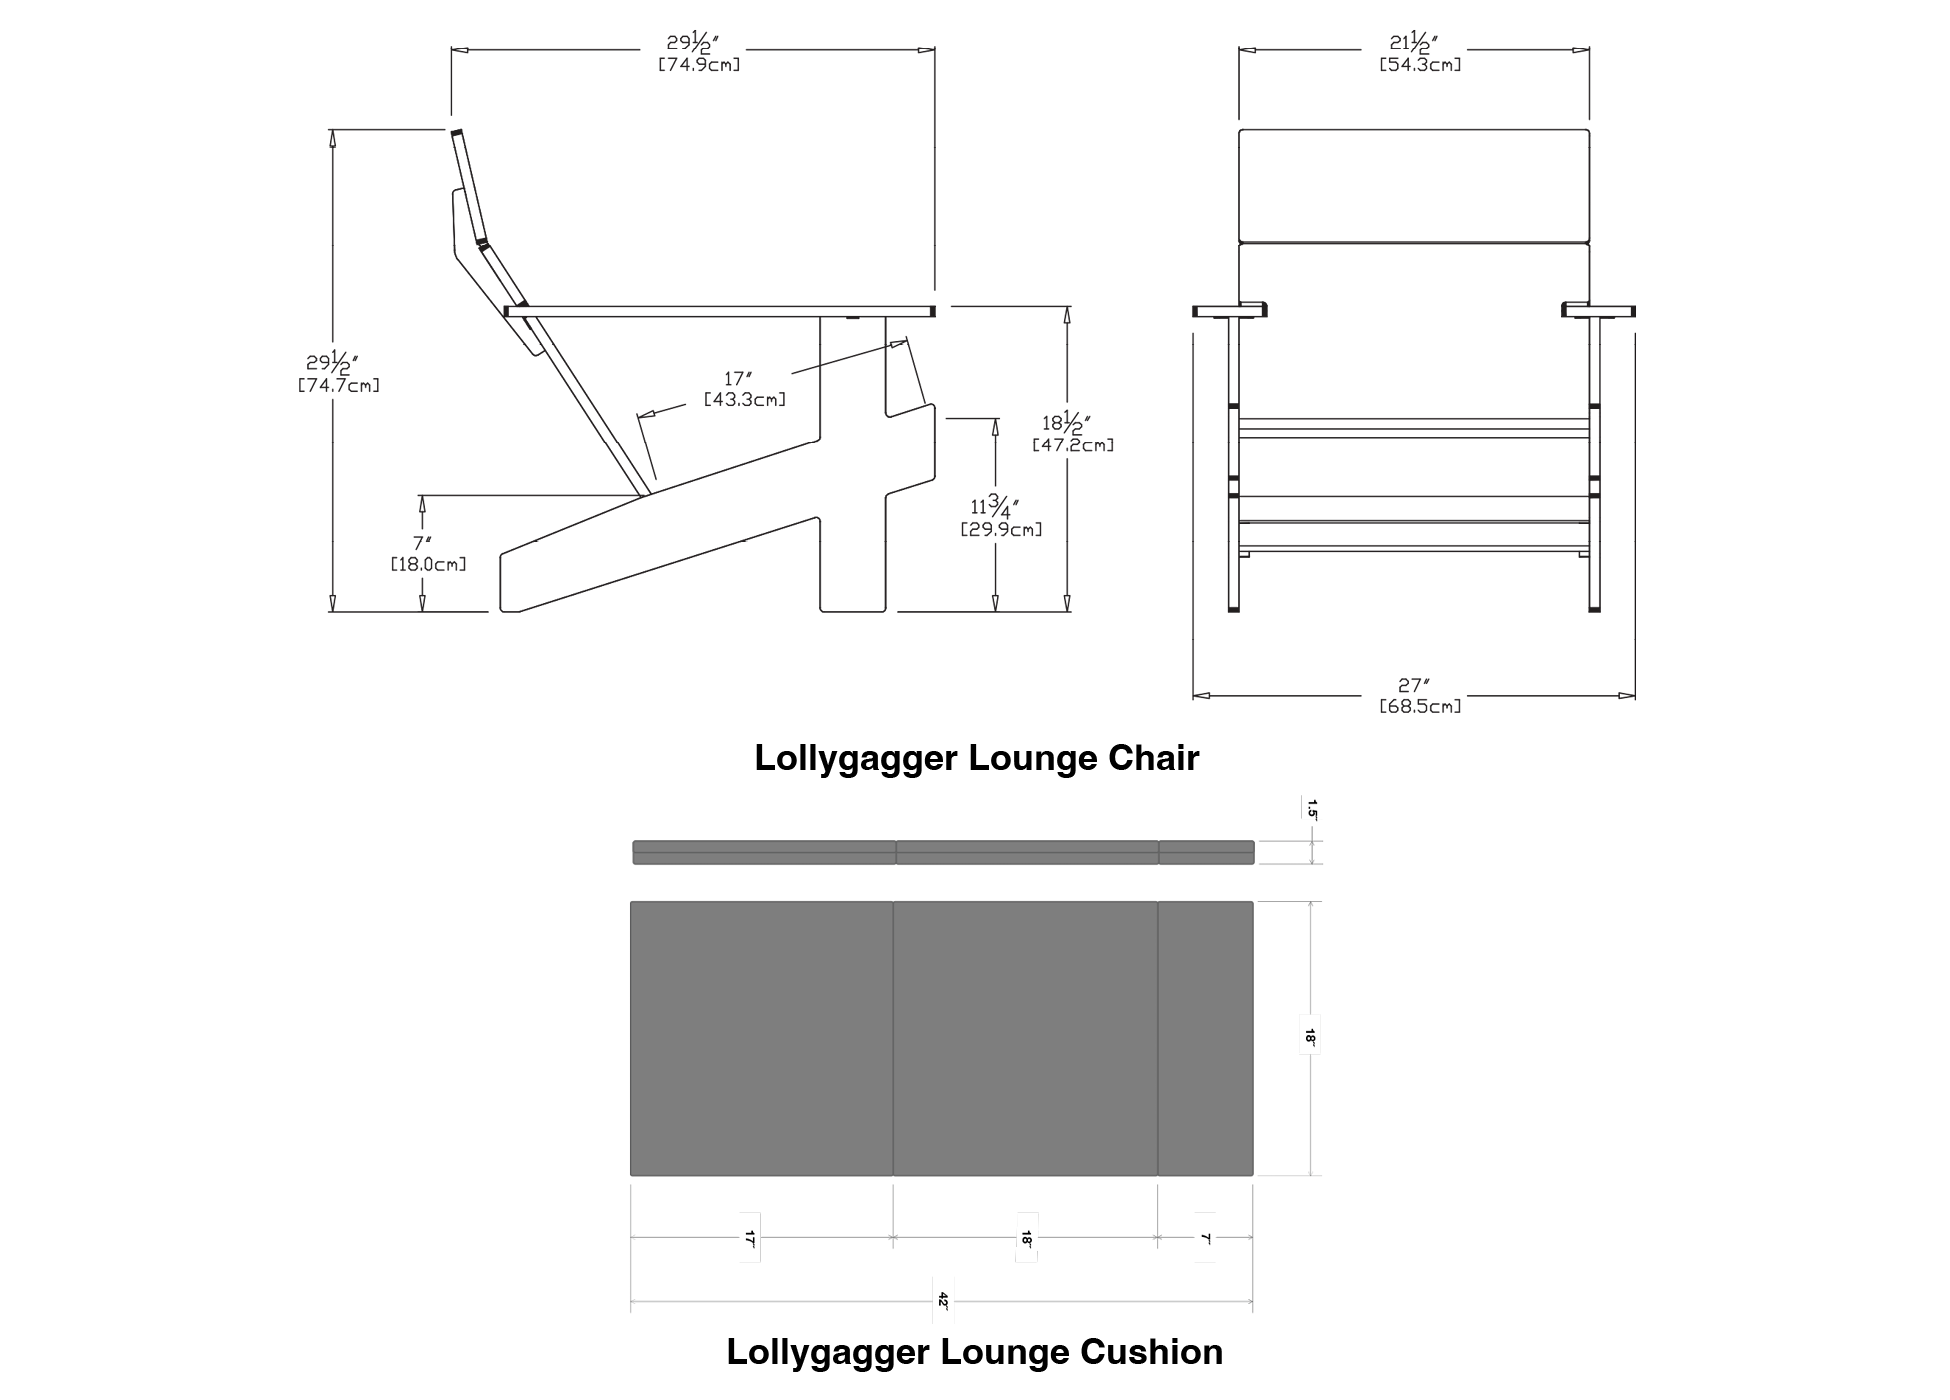 Driftwood Lollygagger Lounges + Charcoal Lollygagger Lounge Cushions Bundle Dimensions